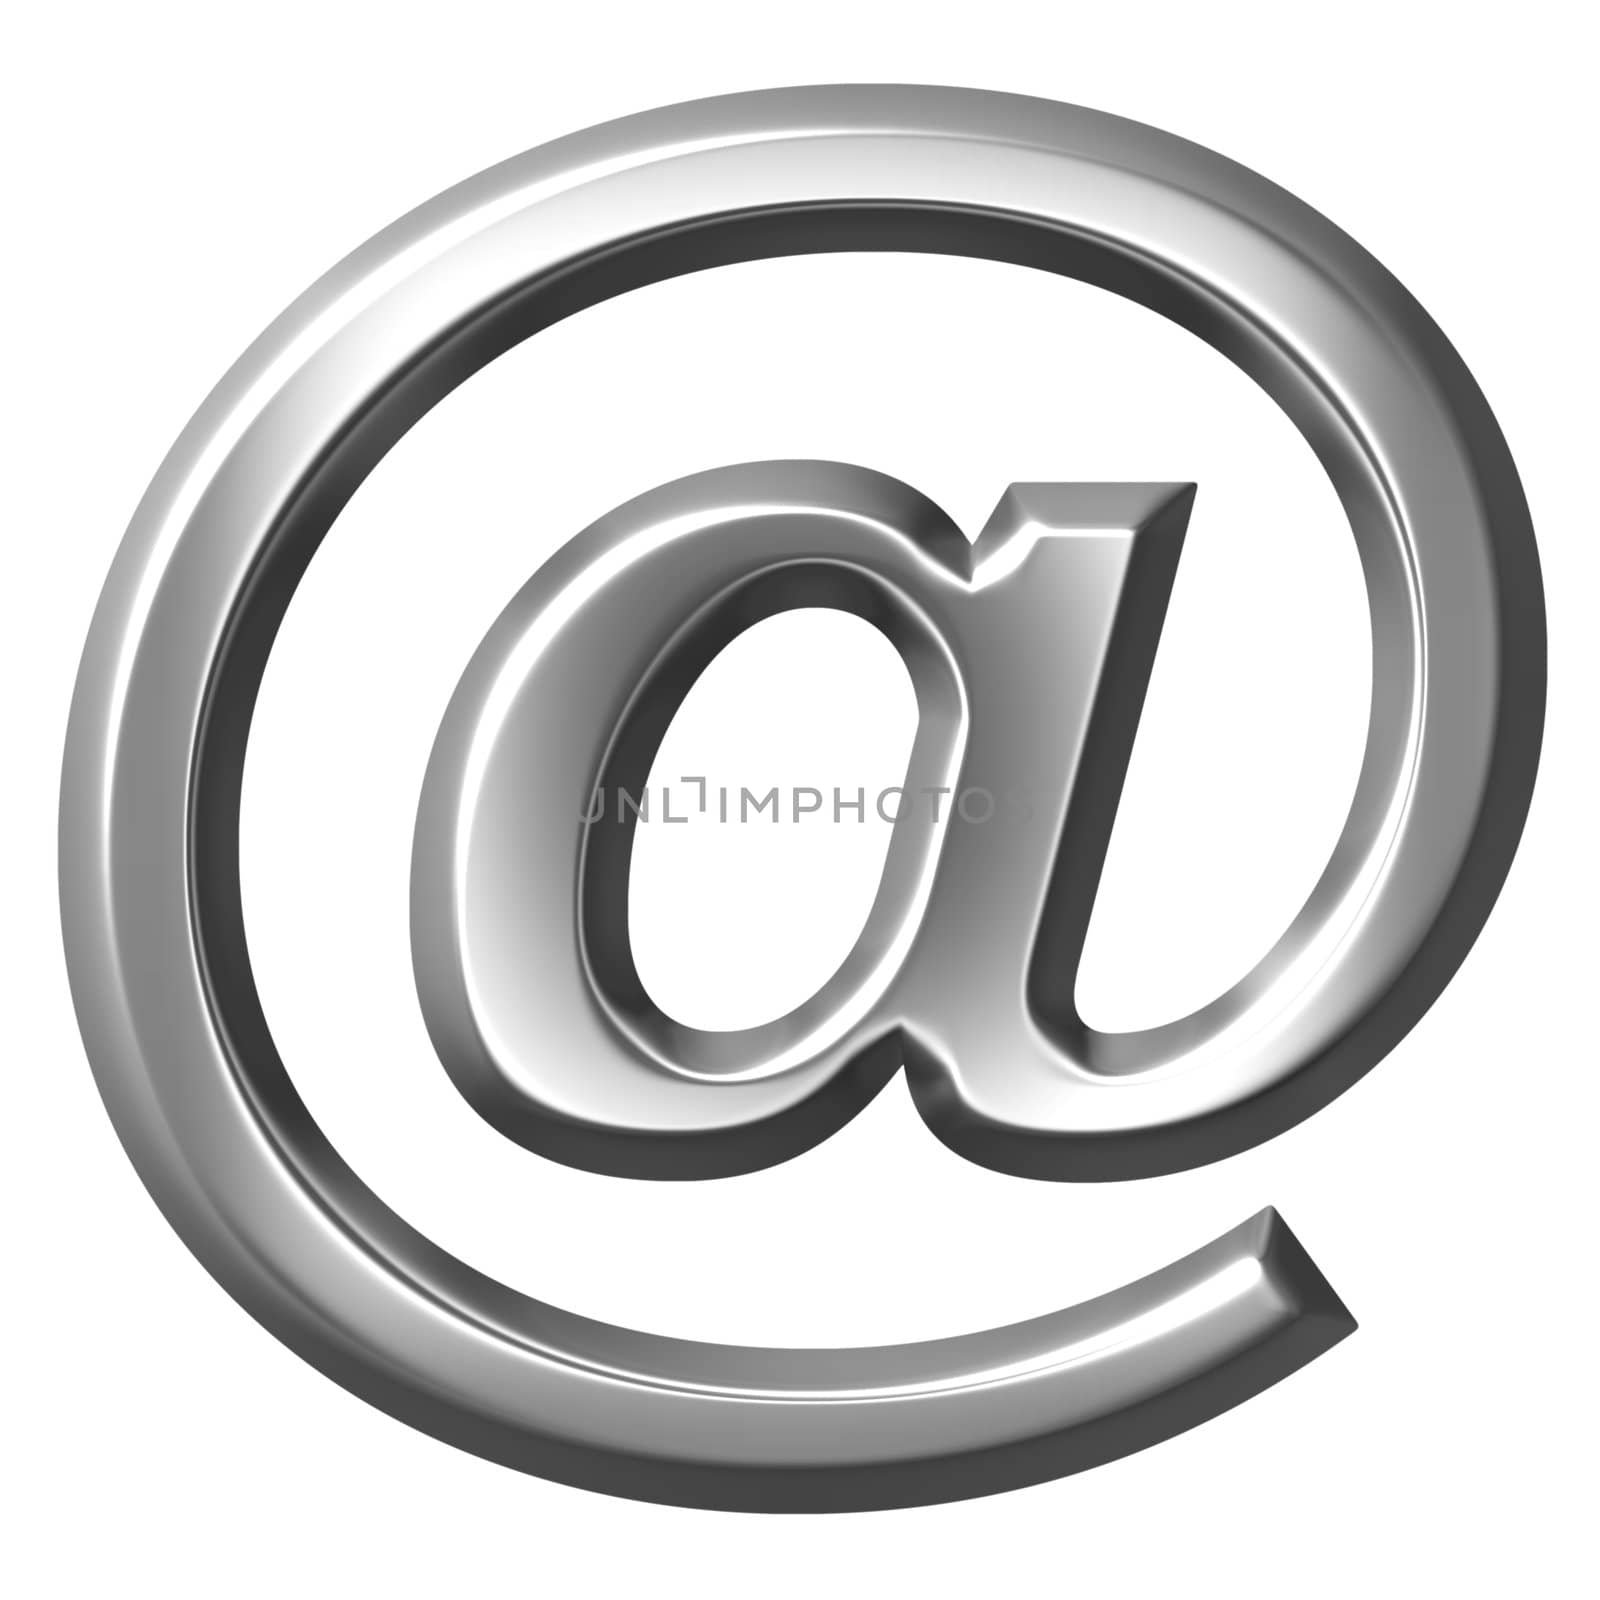 3D Silver Email Symbol  by Georgios